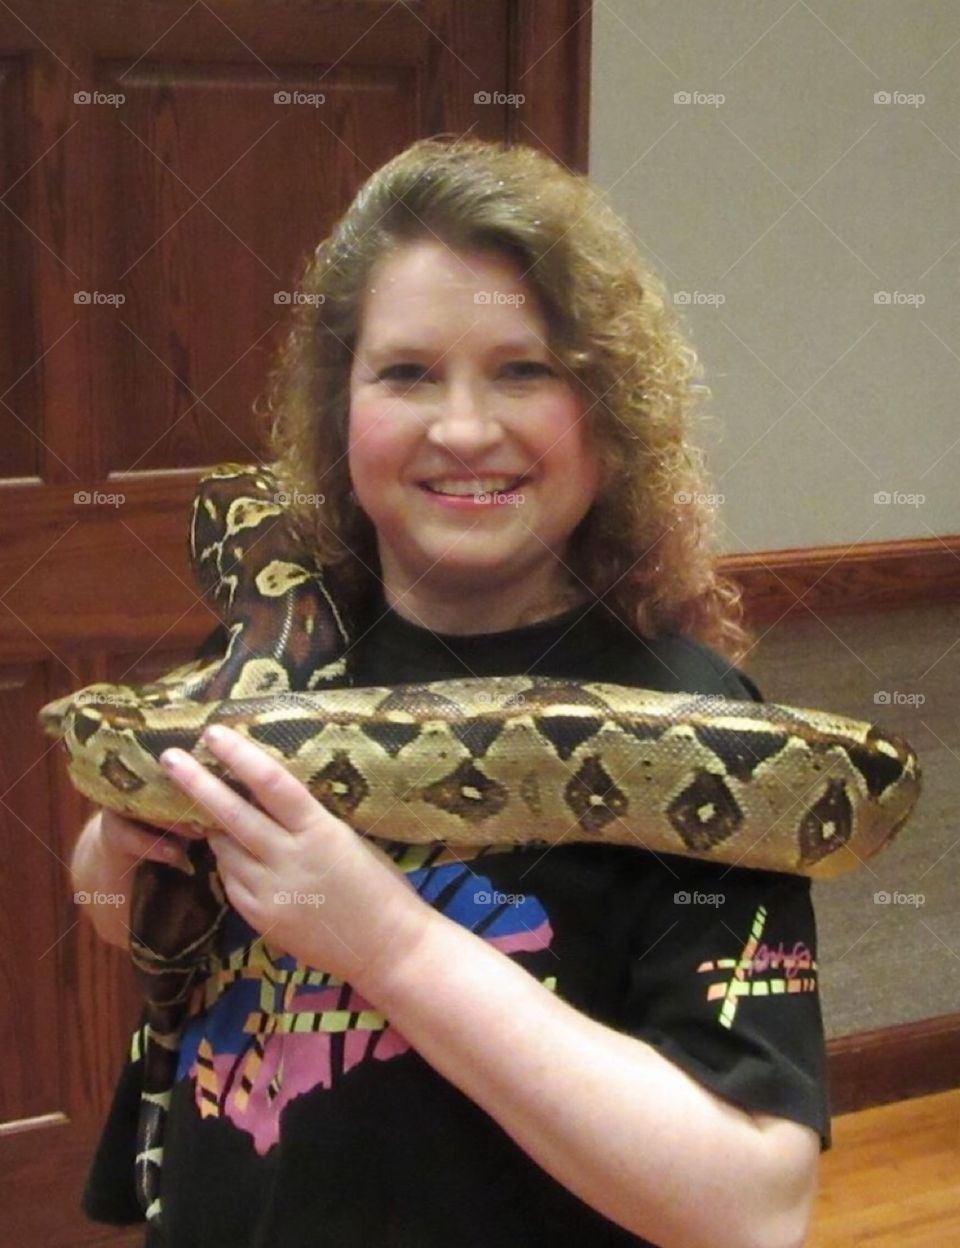 Holding a Boa Constrictor